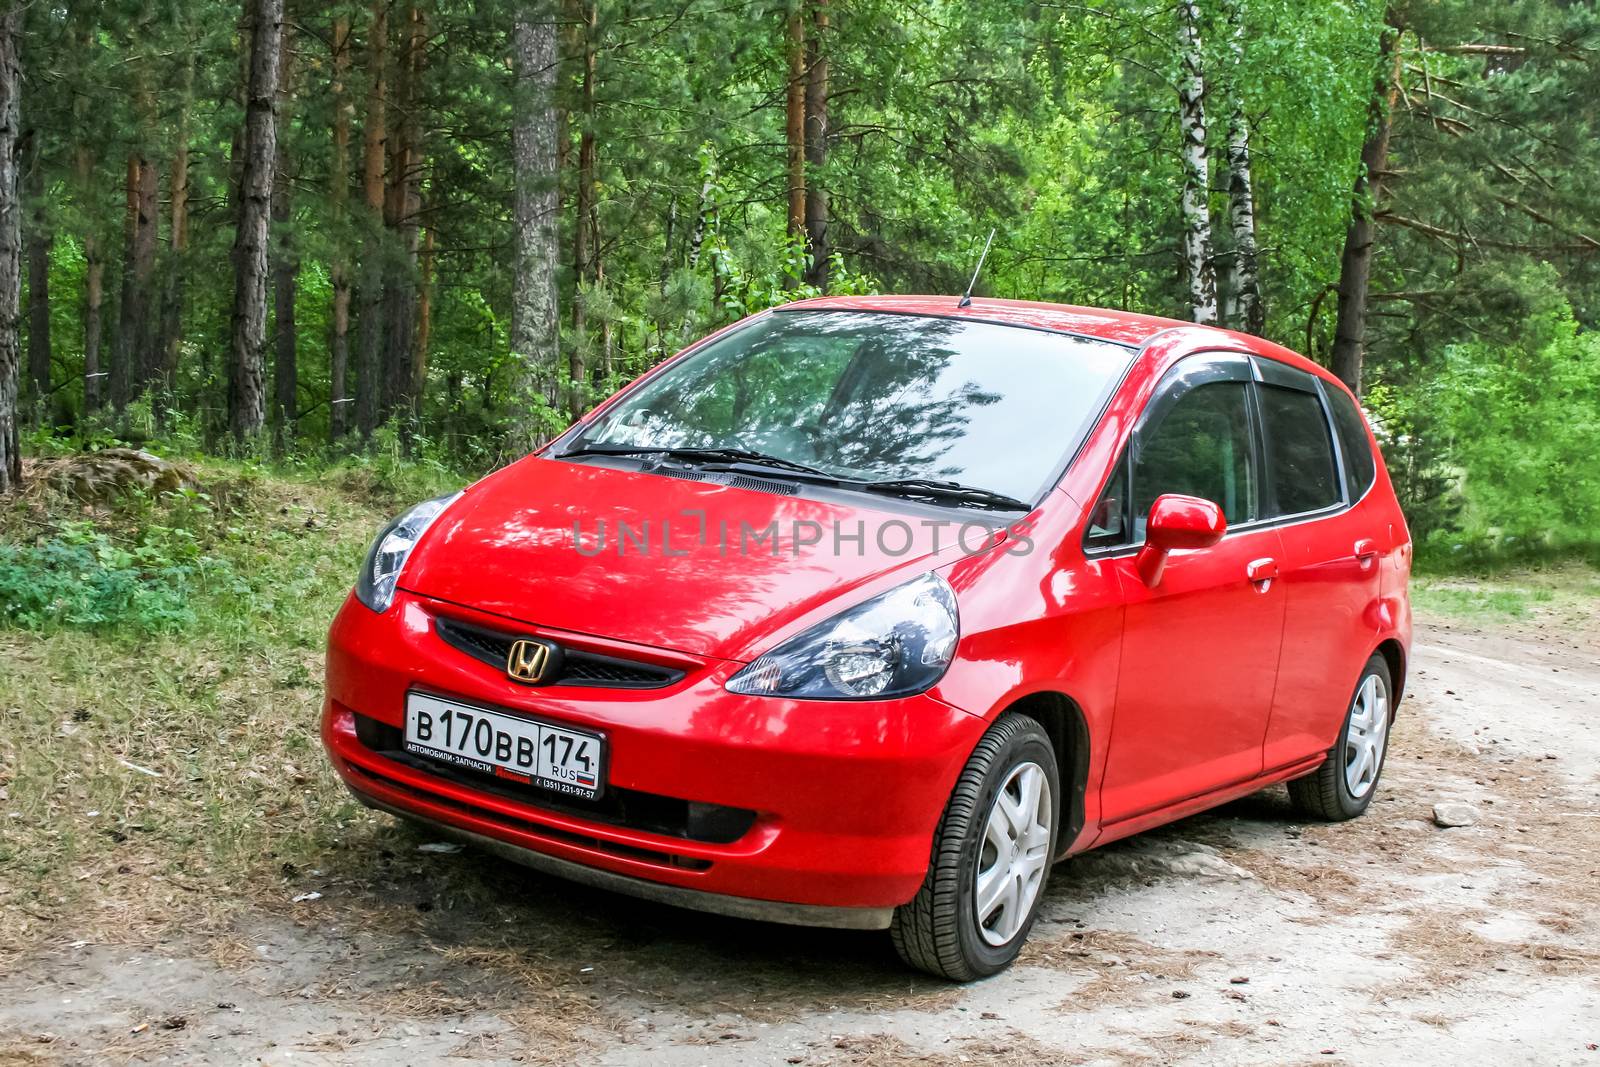 MIASS, RUSSIA - JUNE 12, 2009: Motor car Honda Fit in the forest.